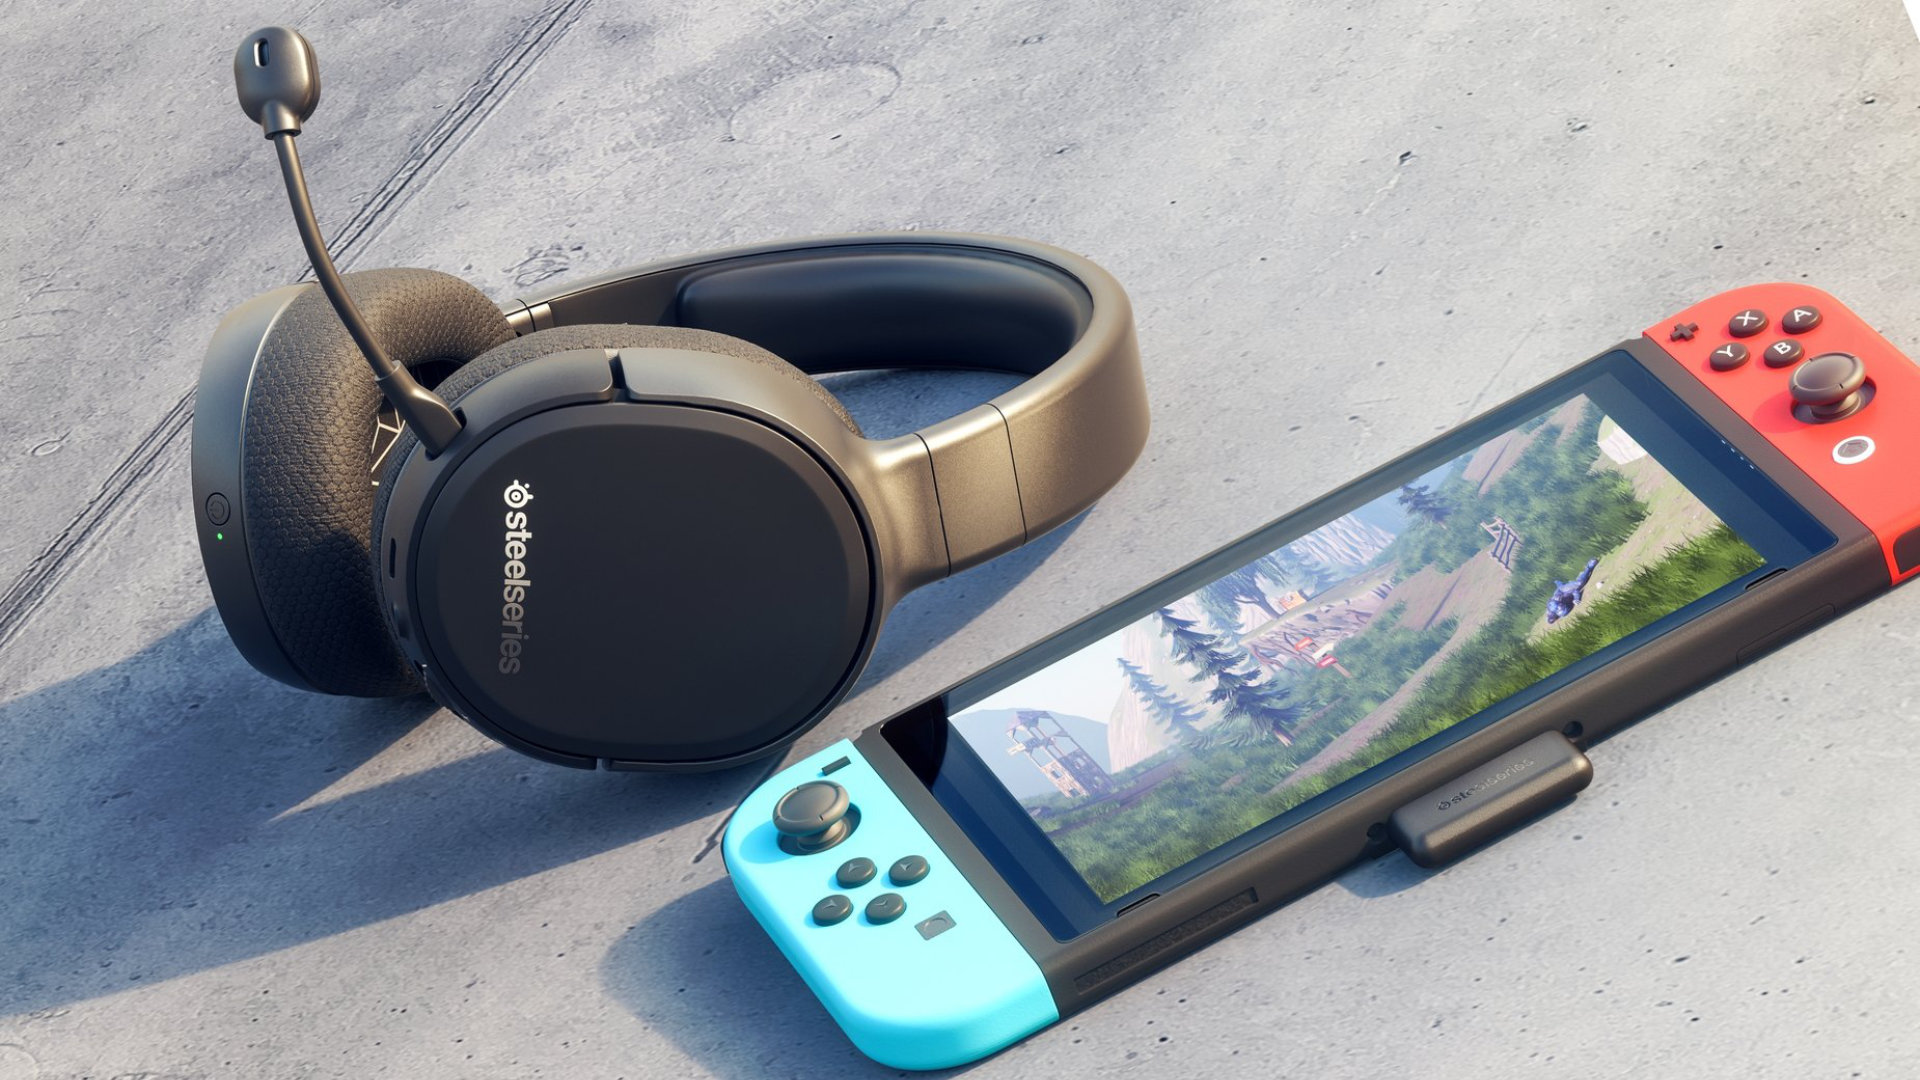 The SteelSeries Arctis 1 Wireless brings cordless audio to gaming PCs and consoles like the Nintendo Switch